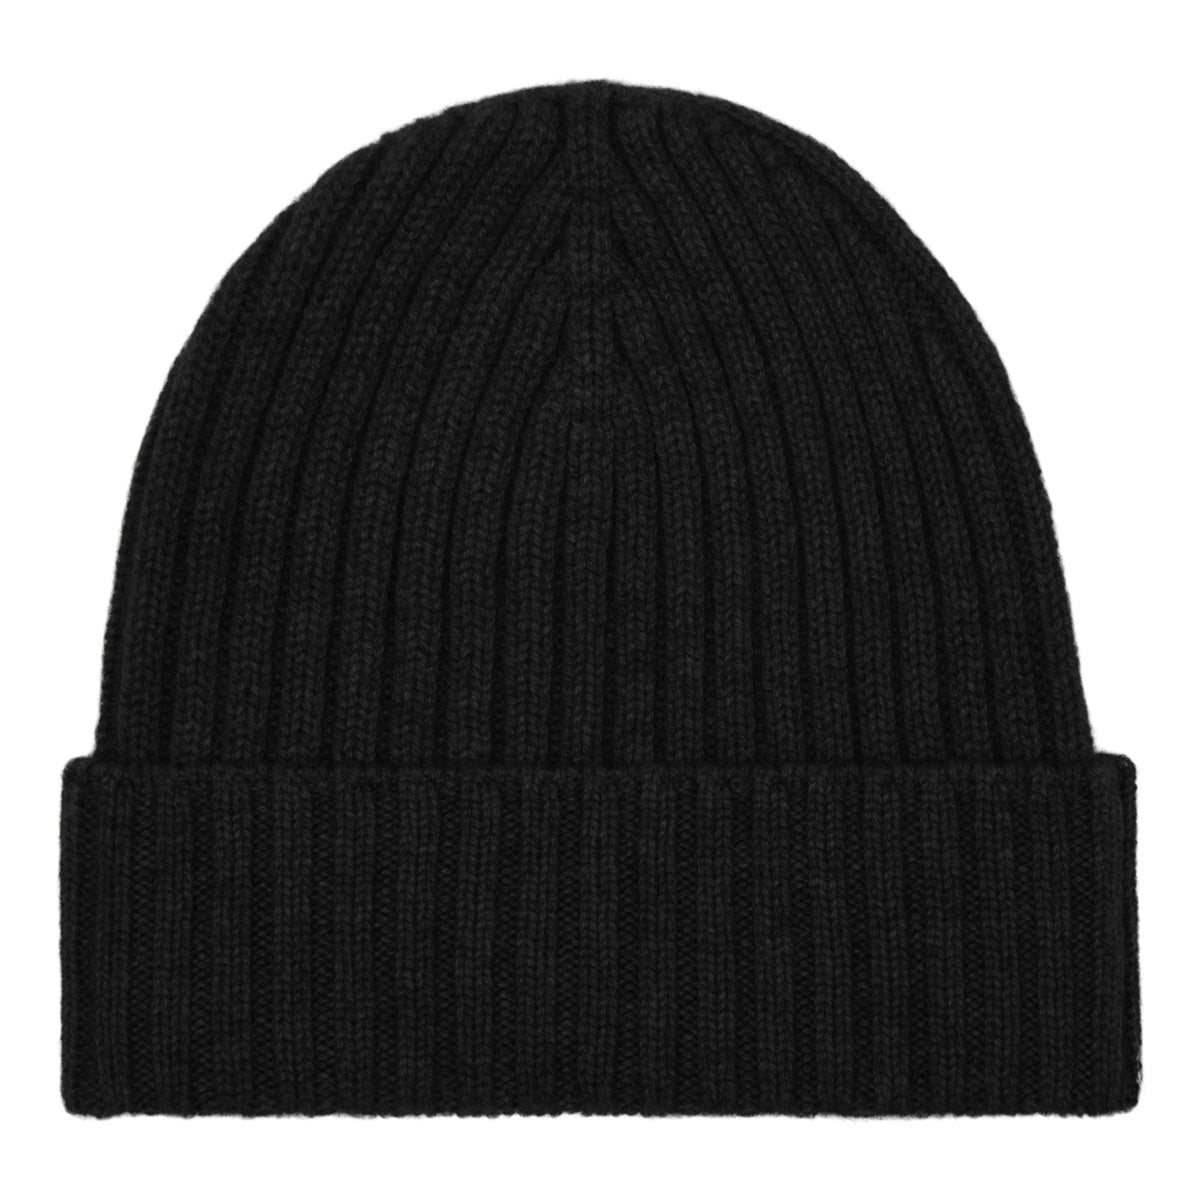 Cashmere Beanie - Black - Made in Italy